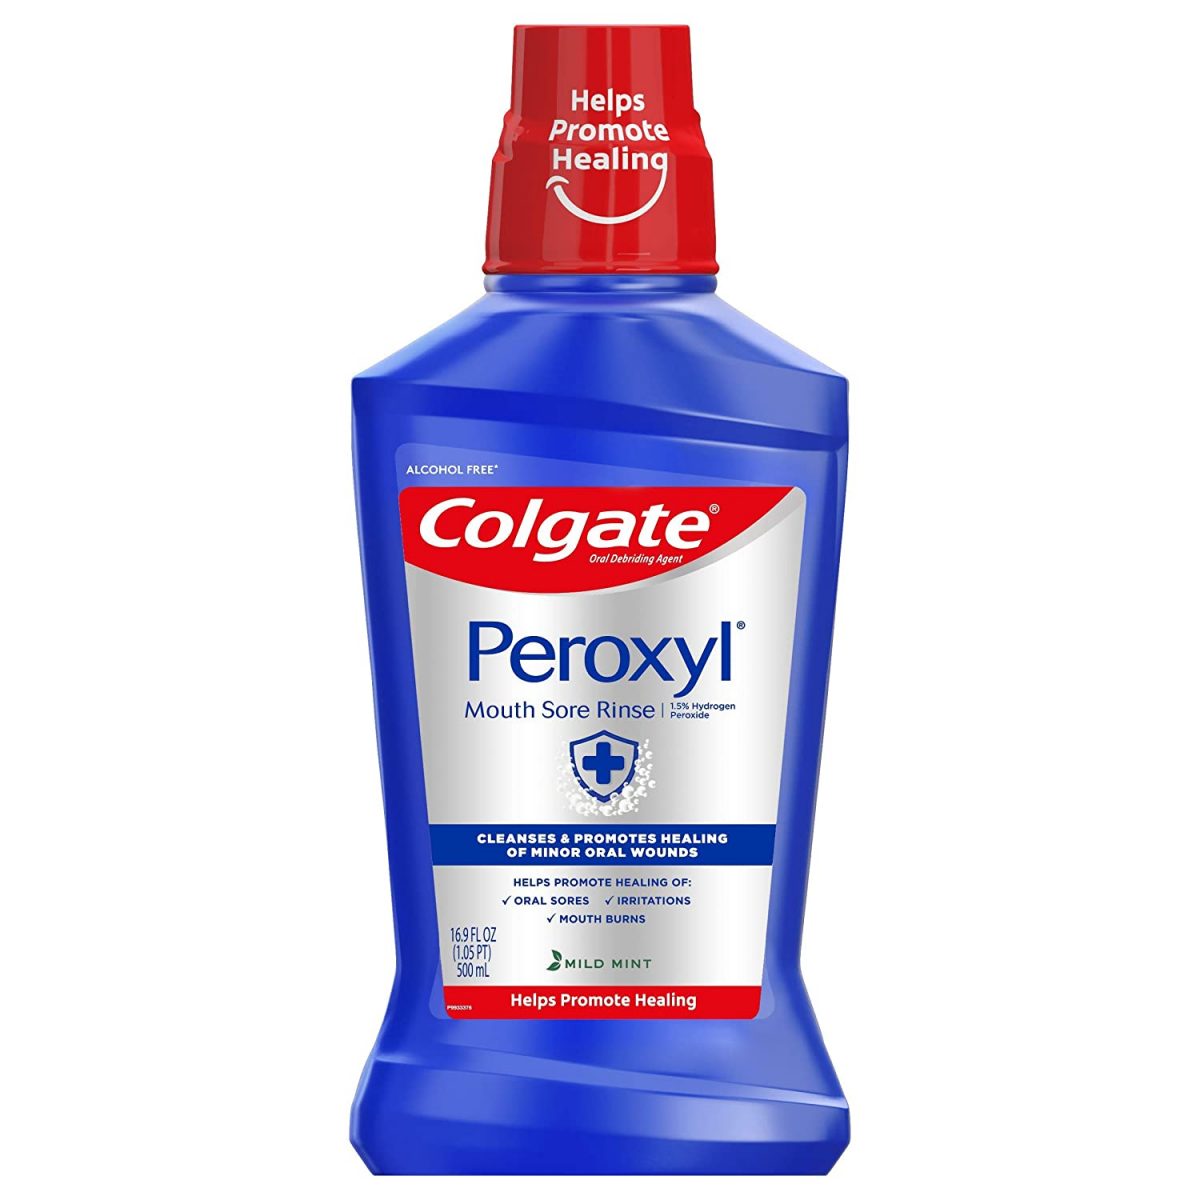 Colgate Peroxyl Antiseptic Mouthwash And Mouth Sore Rinse ⋆ Bold